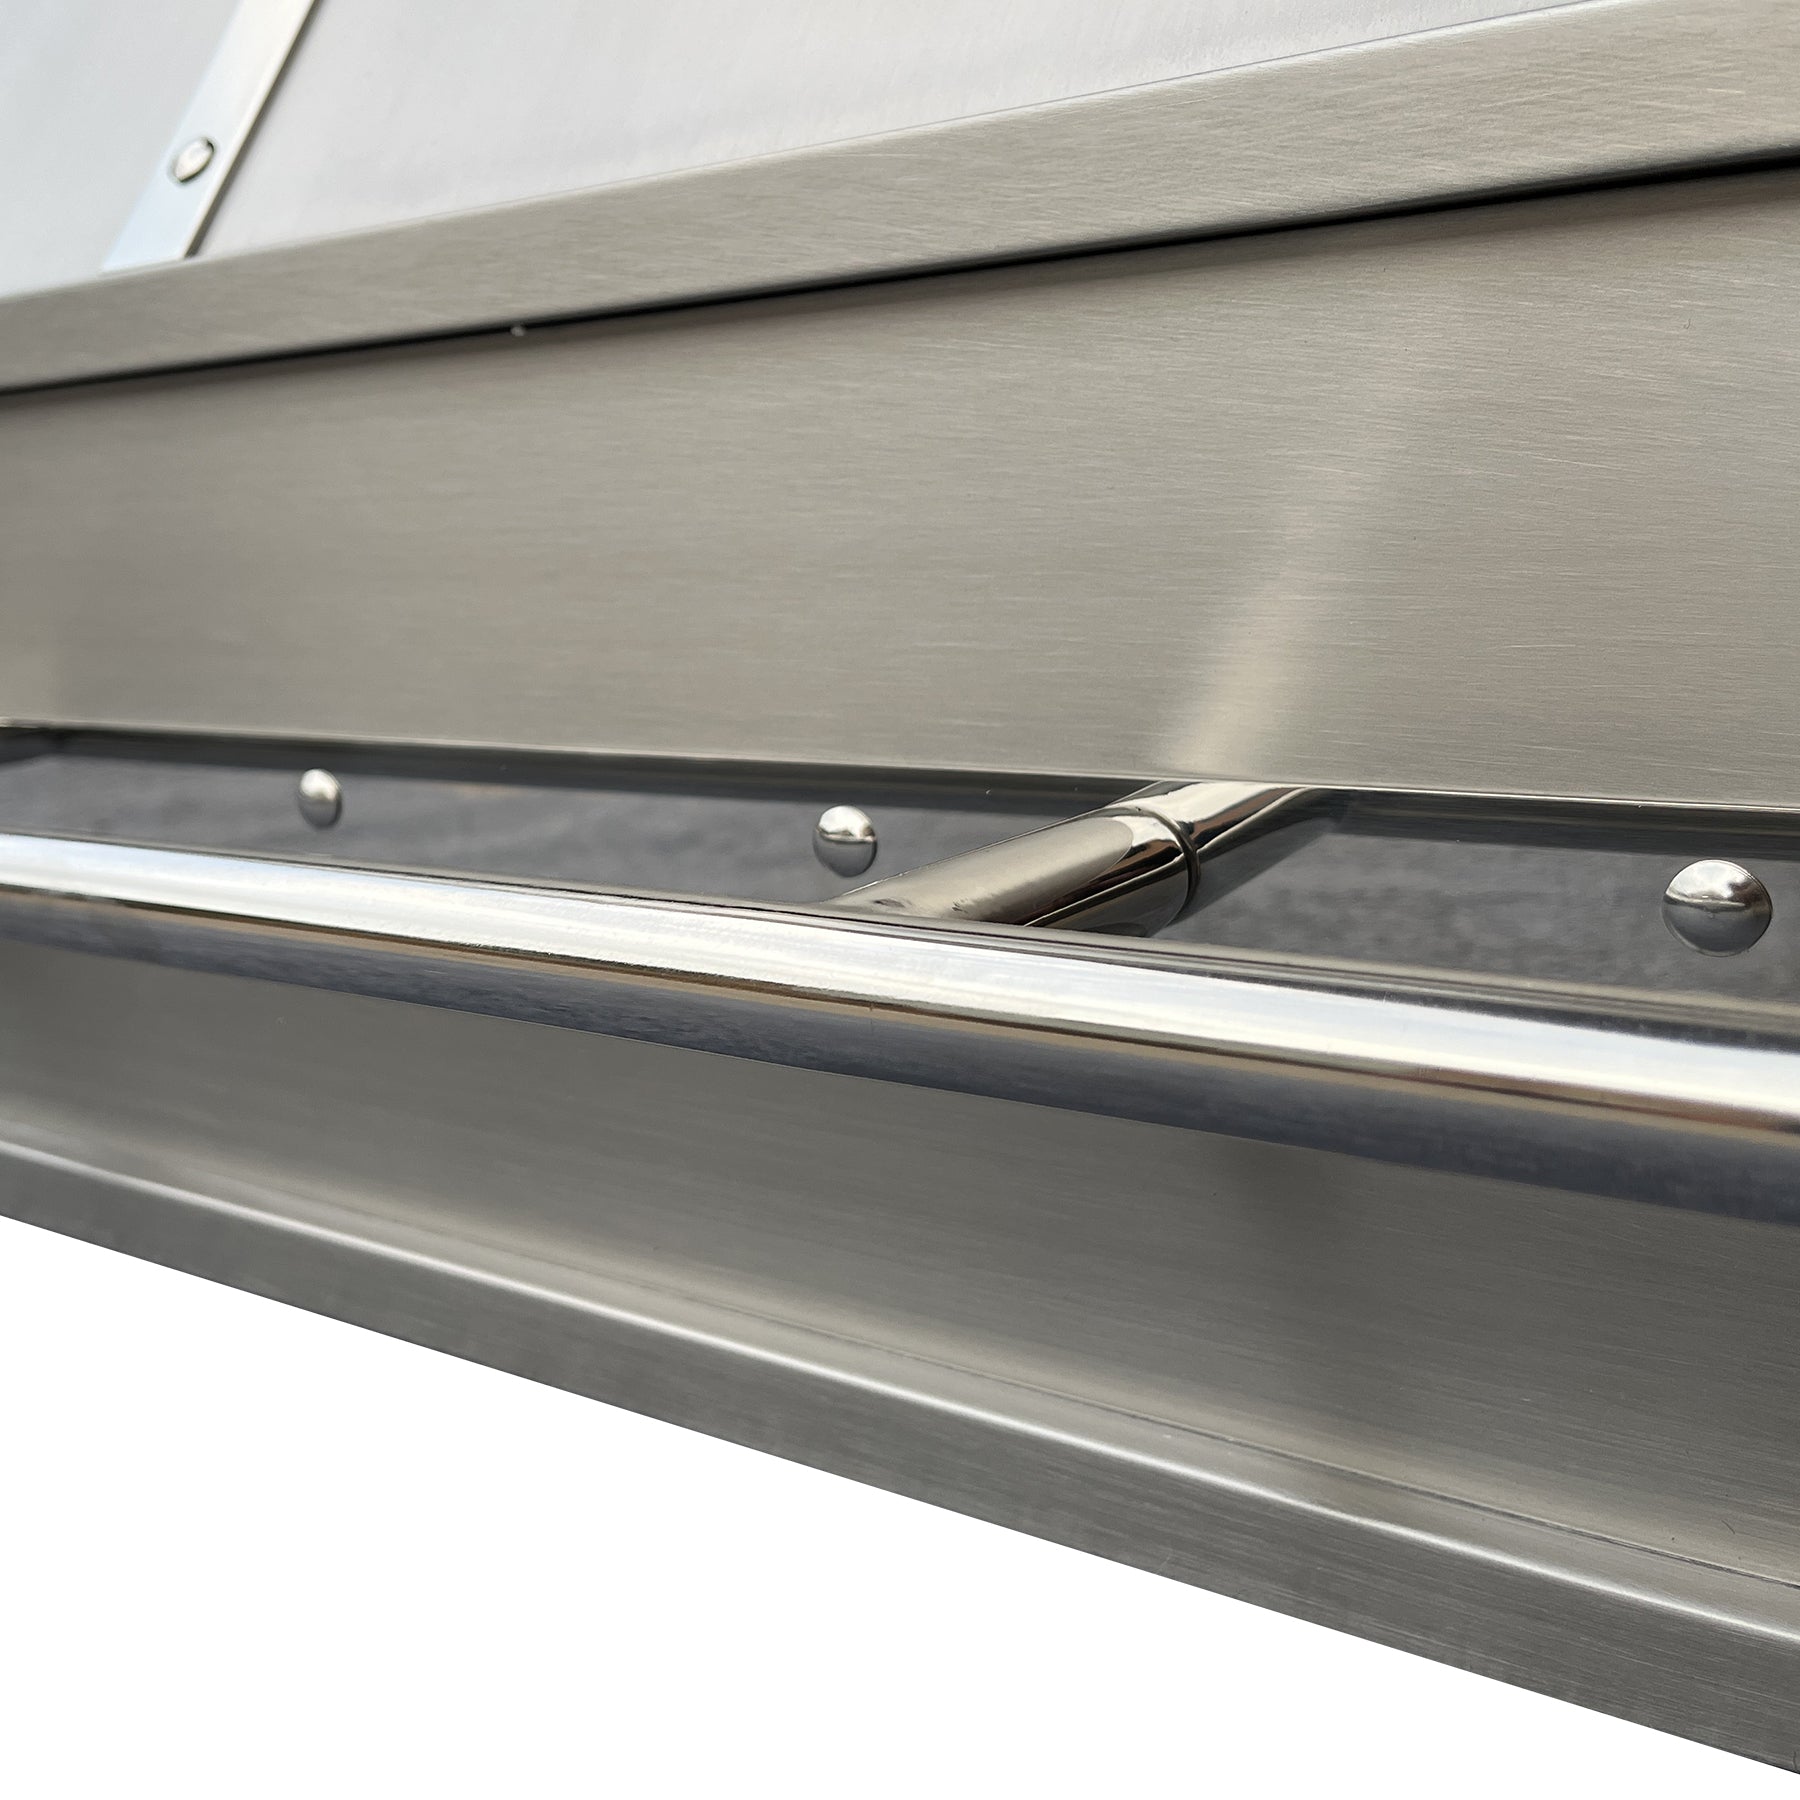 Fobest Custom Handcrafted Brushed Stainless Steel Range Hood with straps in kitchen FSS-6 - hood model